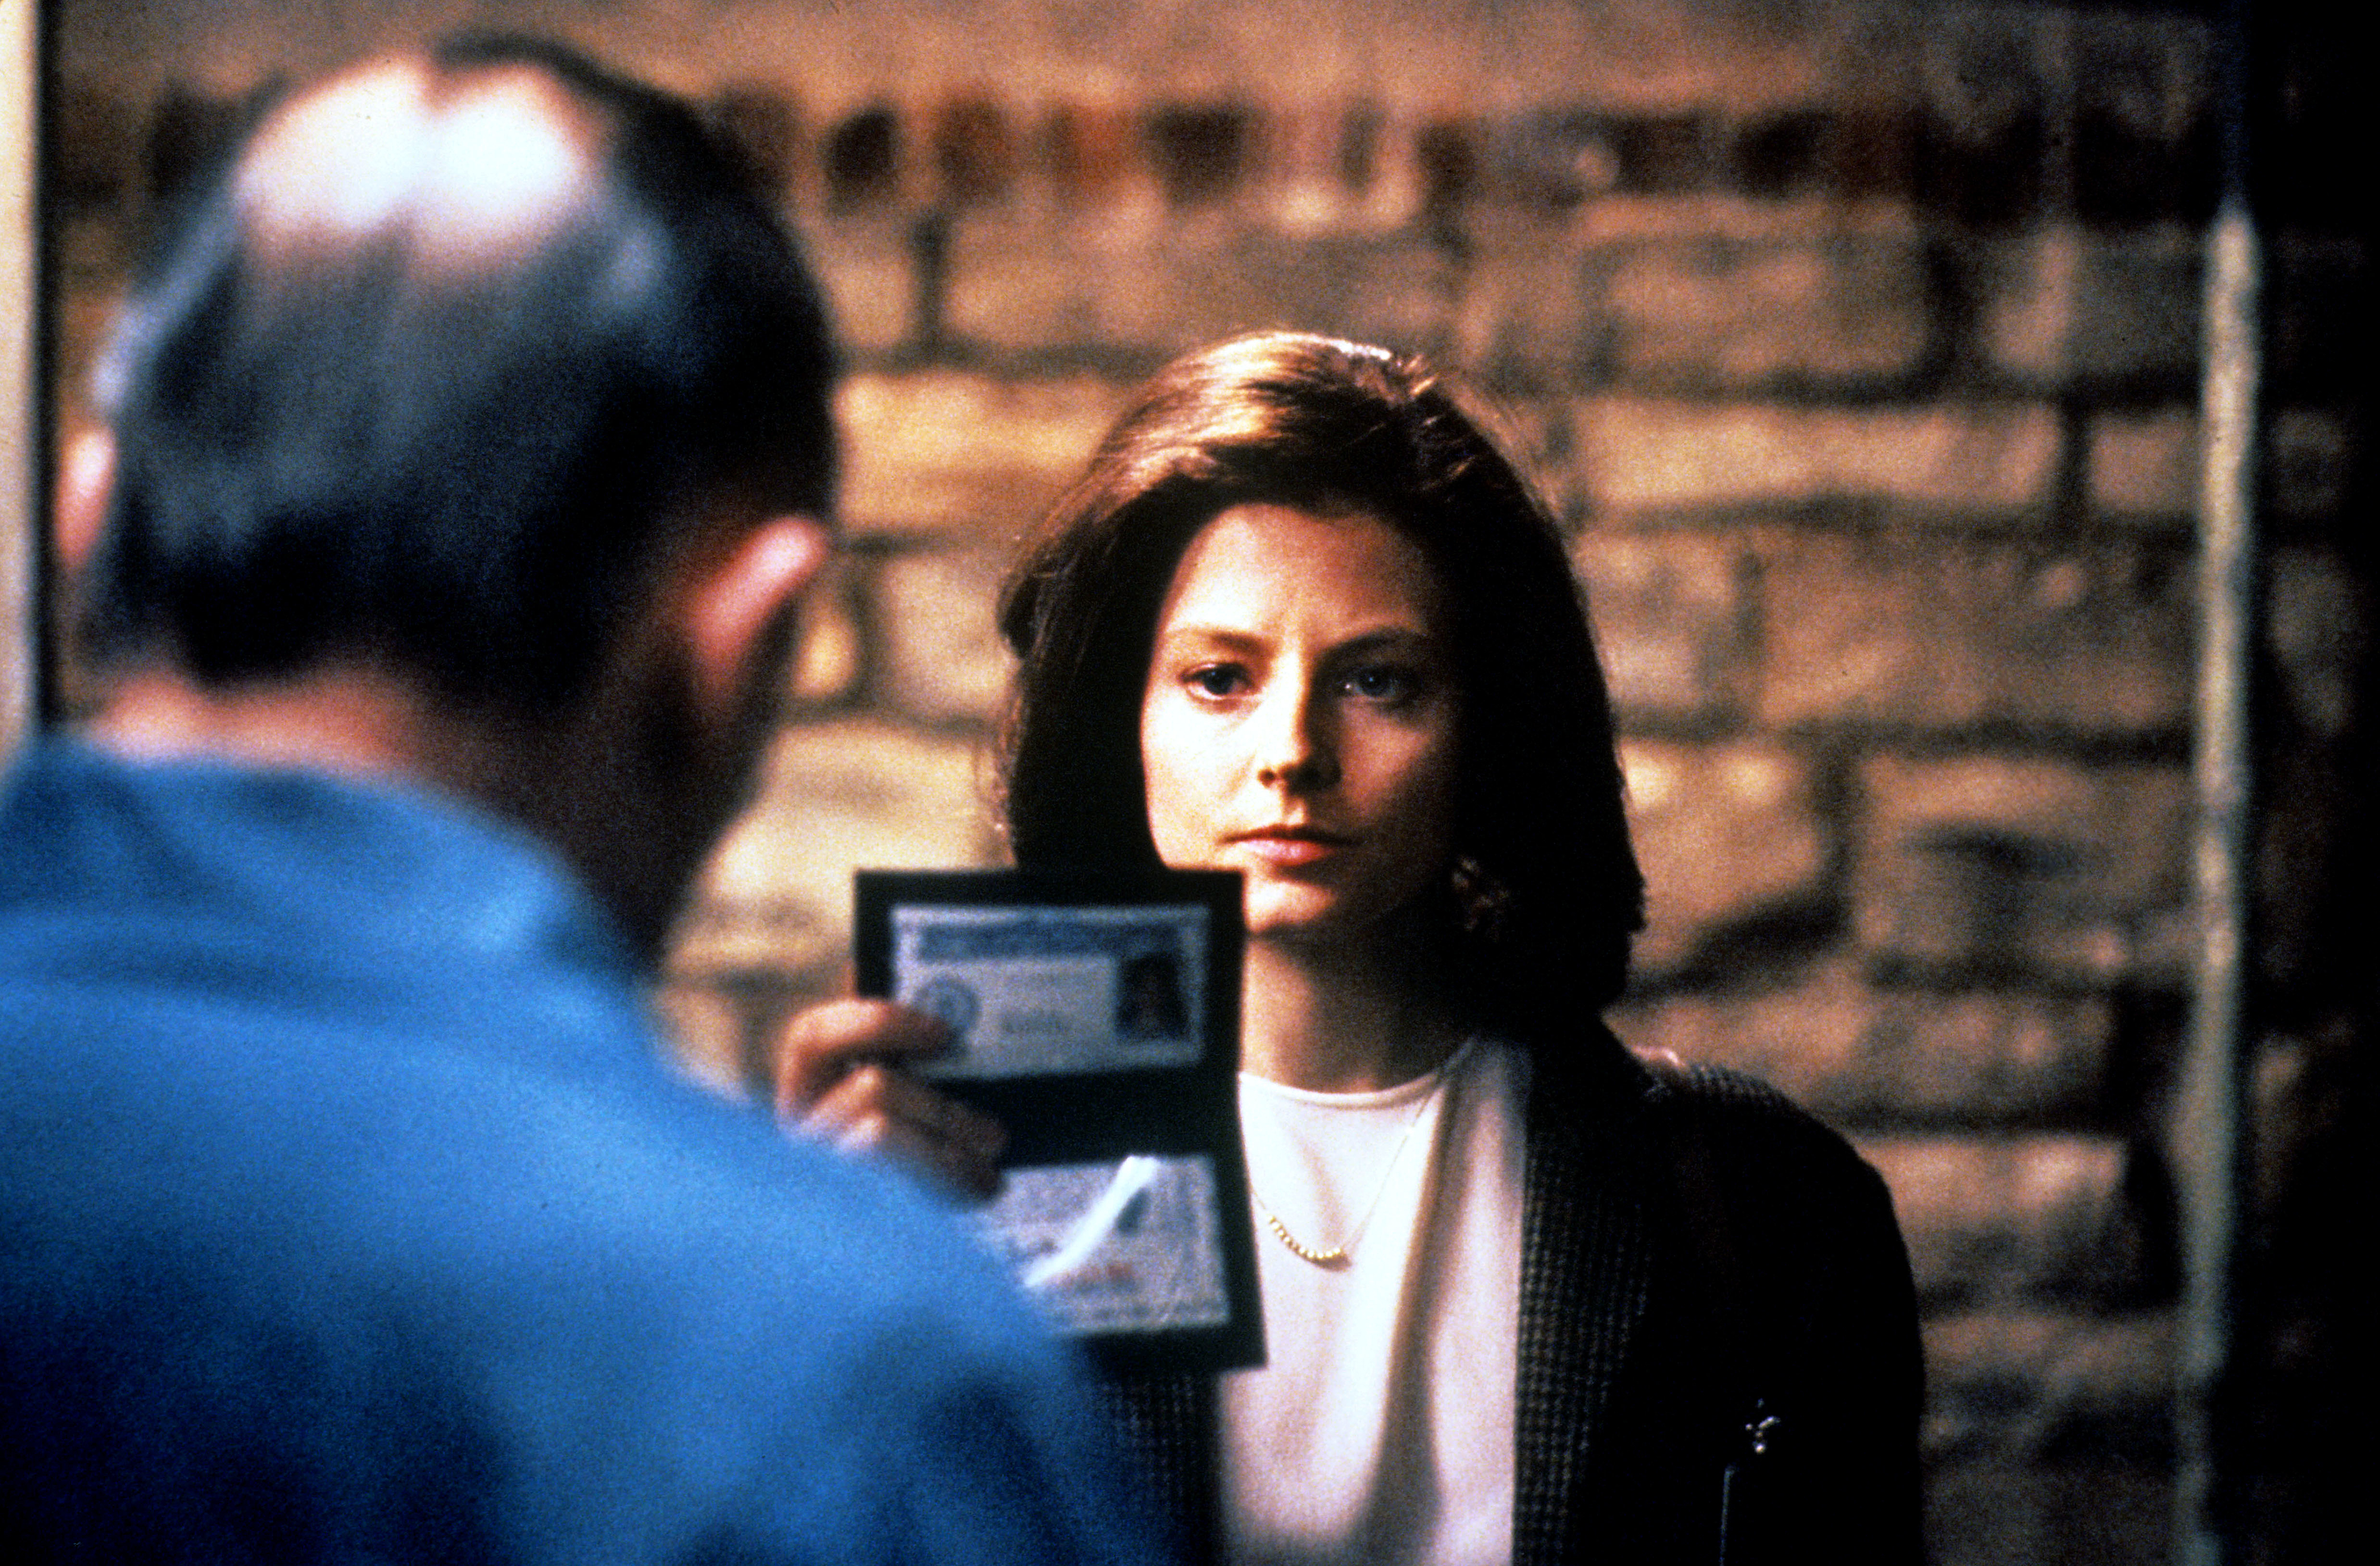 Jodie holding up her FBI badge in a scene from &quot;The Silence of the Lambs&quot;